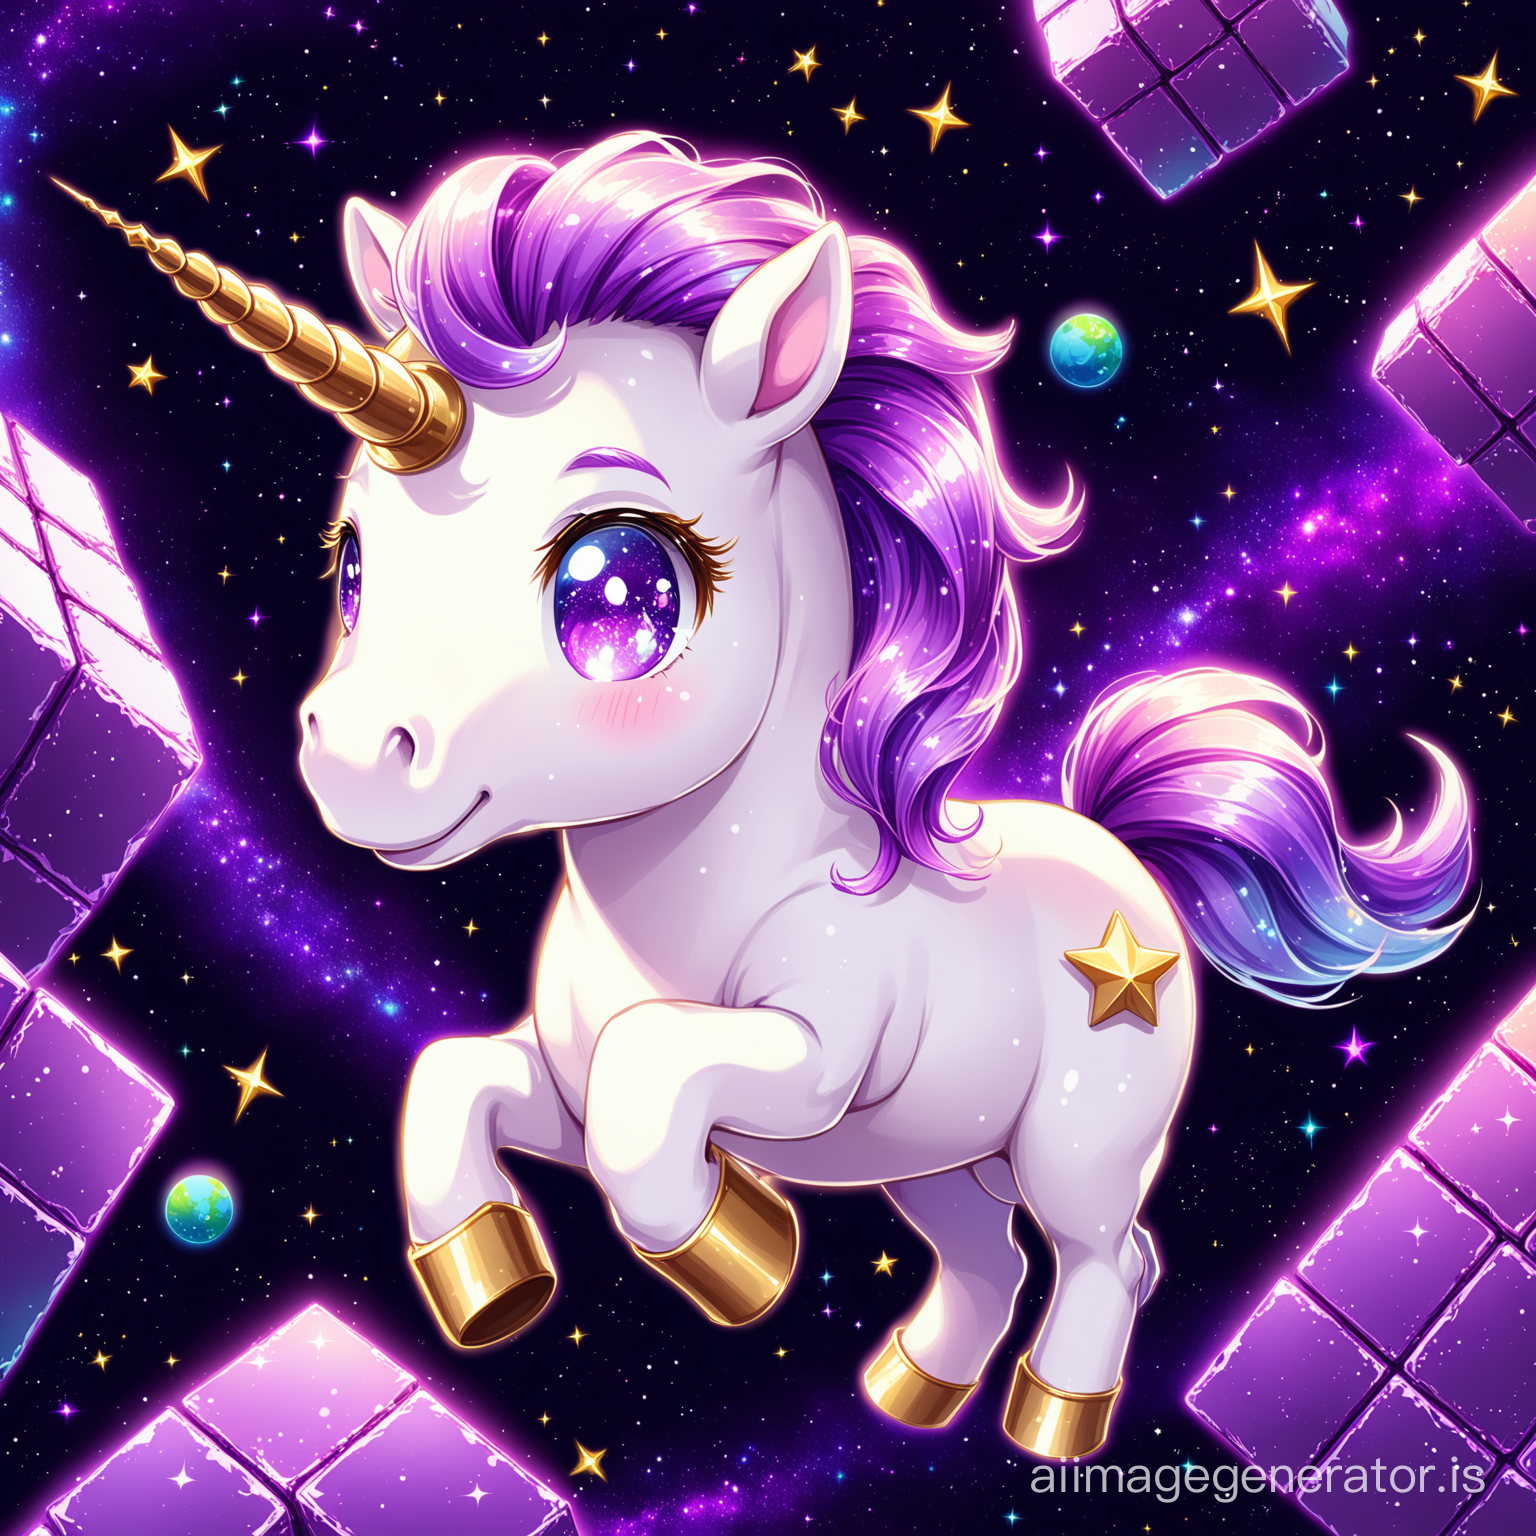 A little happy cute little unicorn with purple eye and smile in space with super detail and High Quality
big and purple blocks and floating are seen everywhere
Details are evident beautifully and with great precision